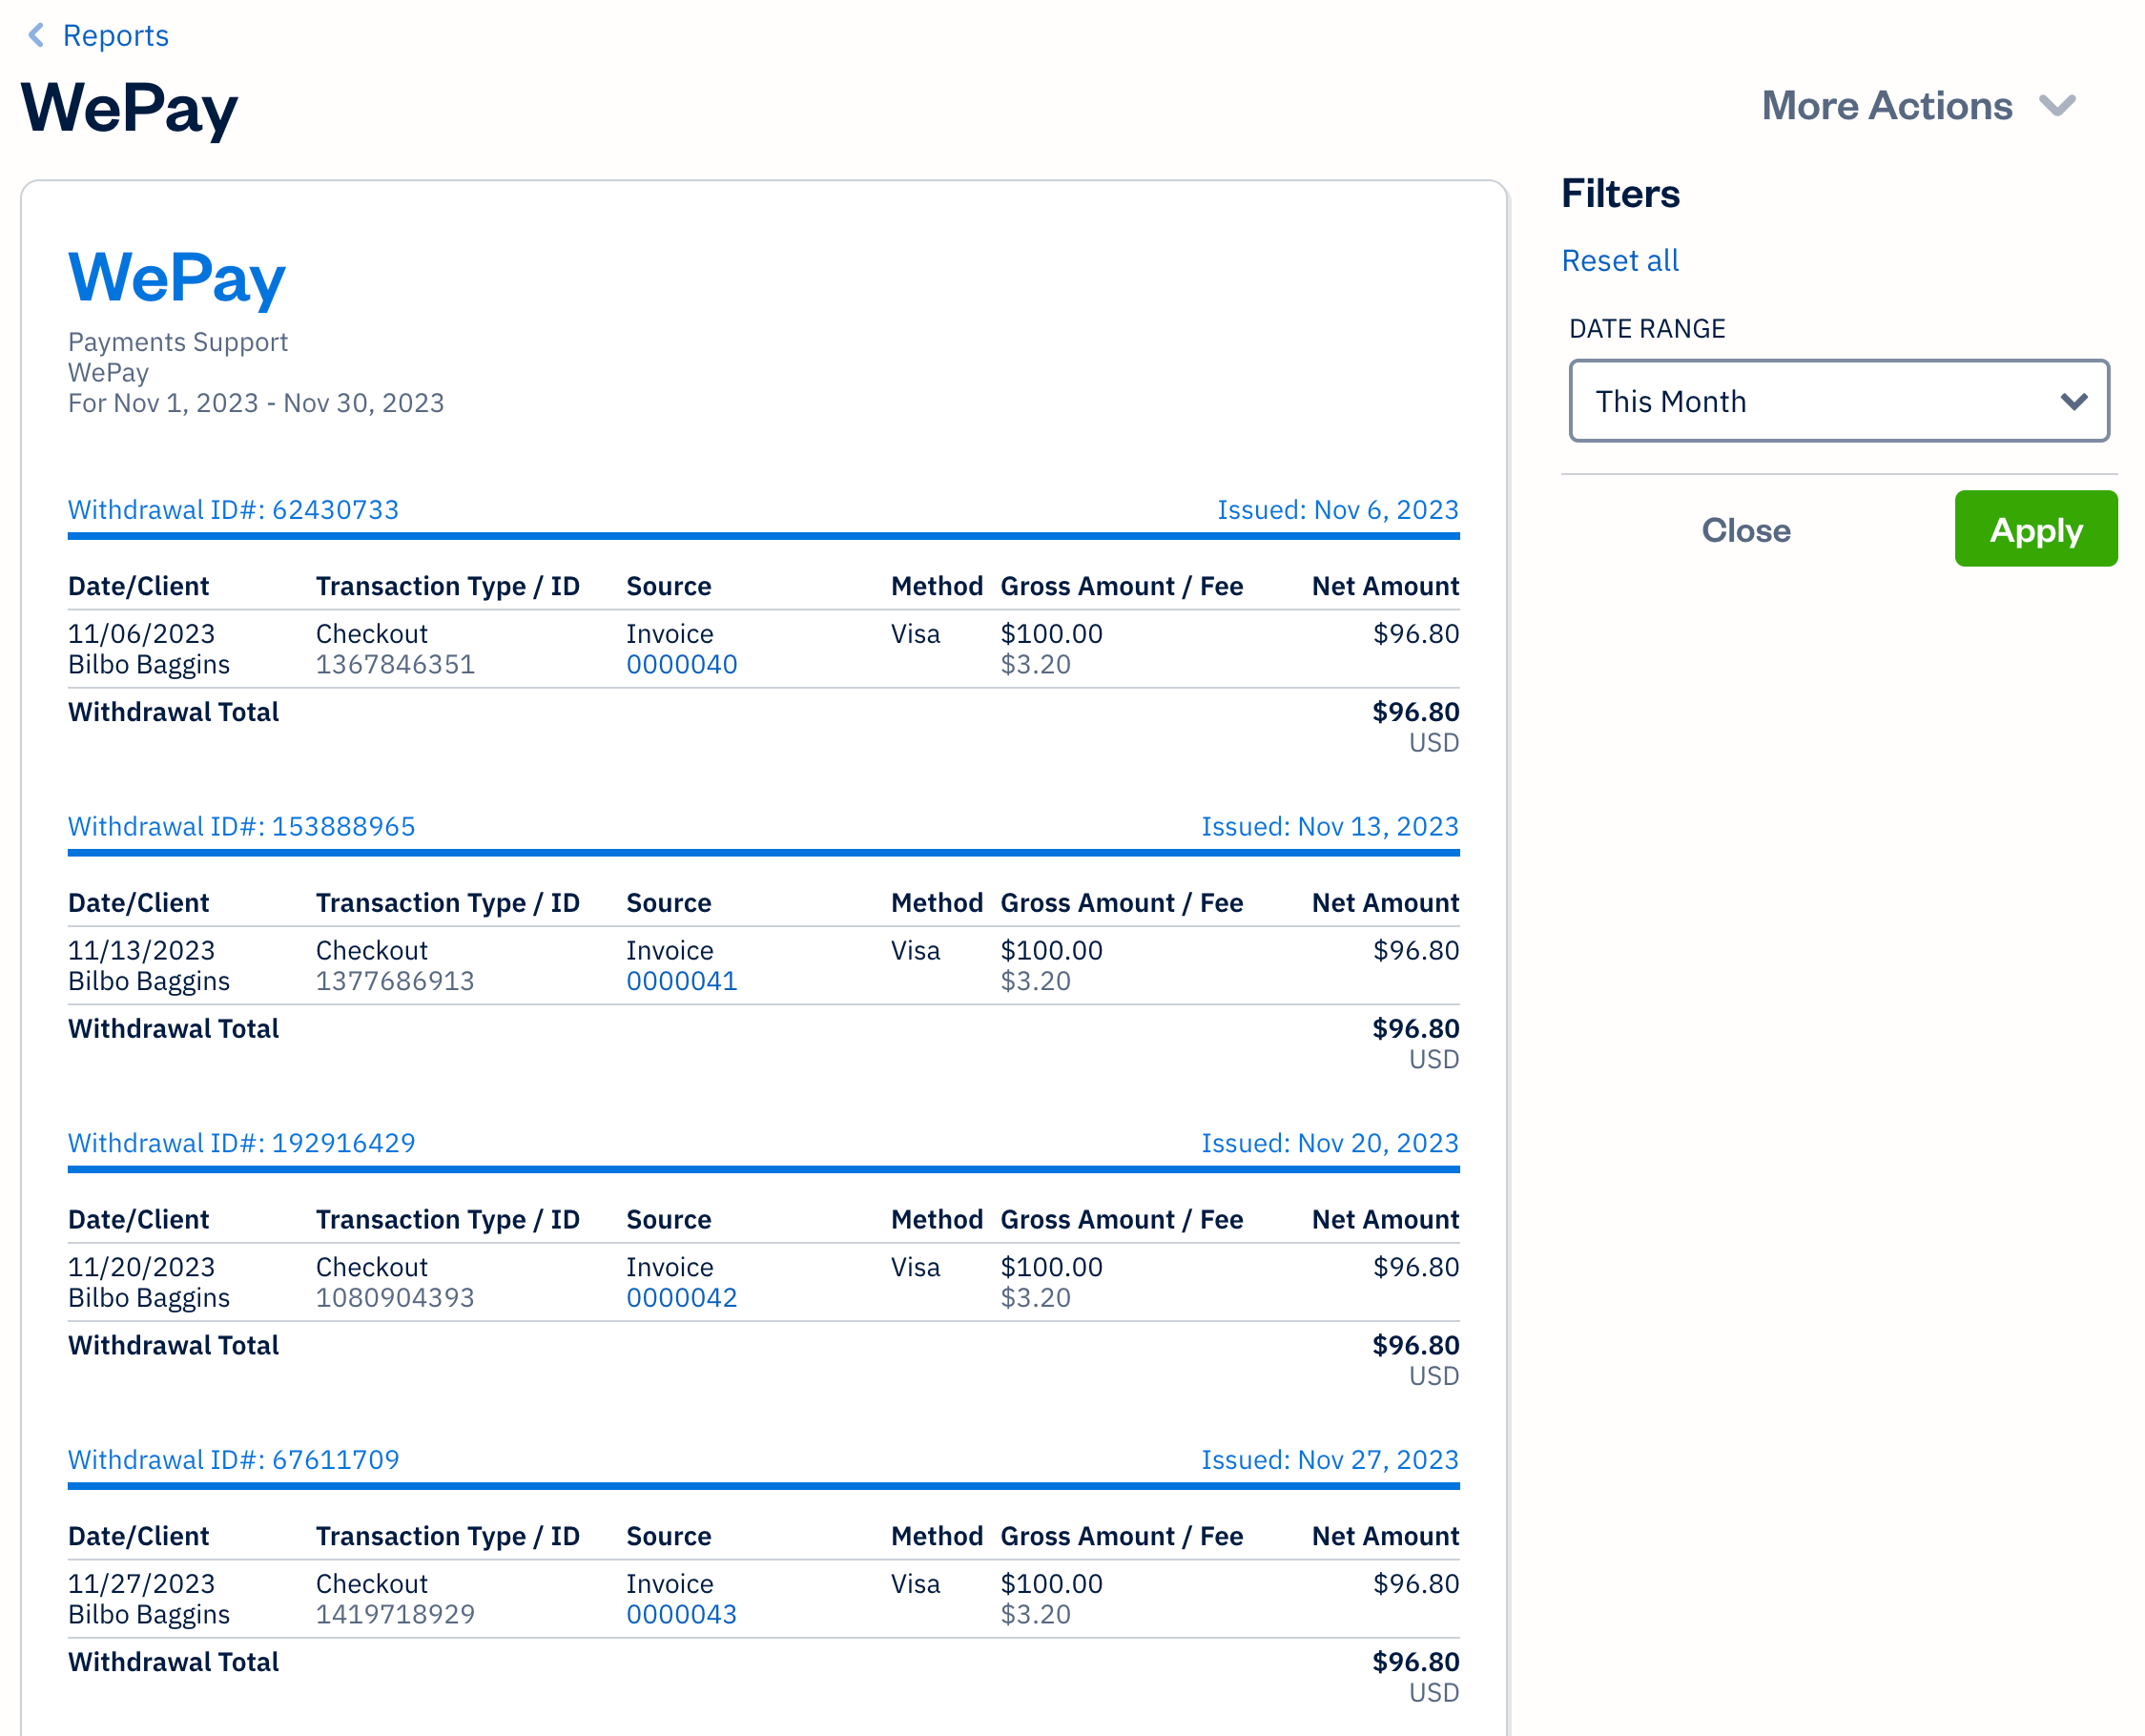 WePay report showing all transaction fees with details and filters on the right side.